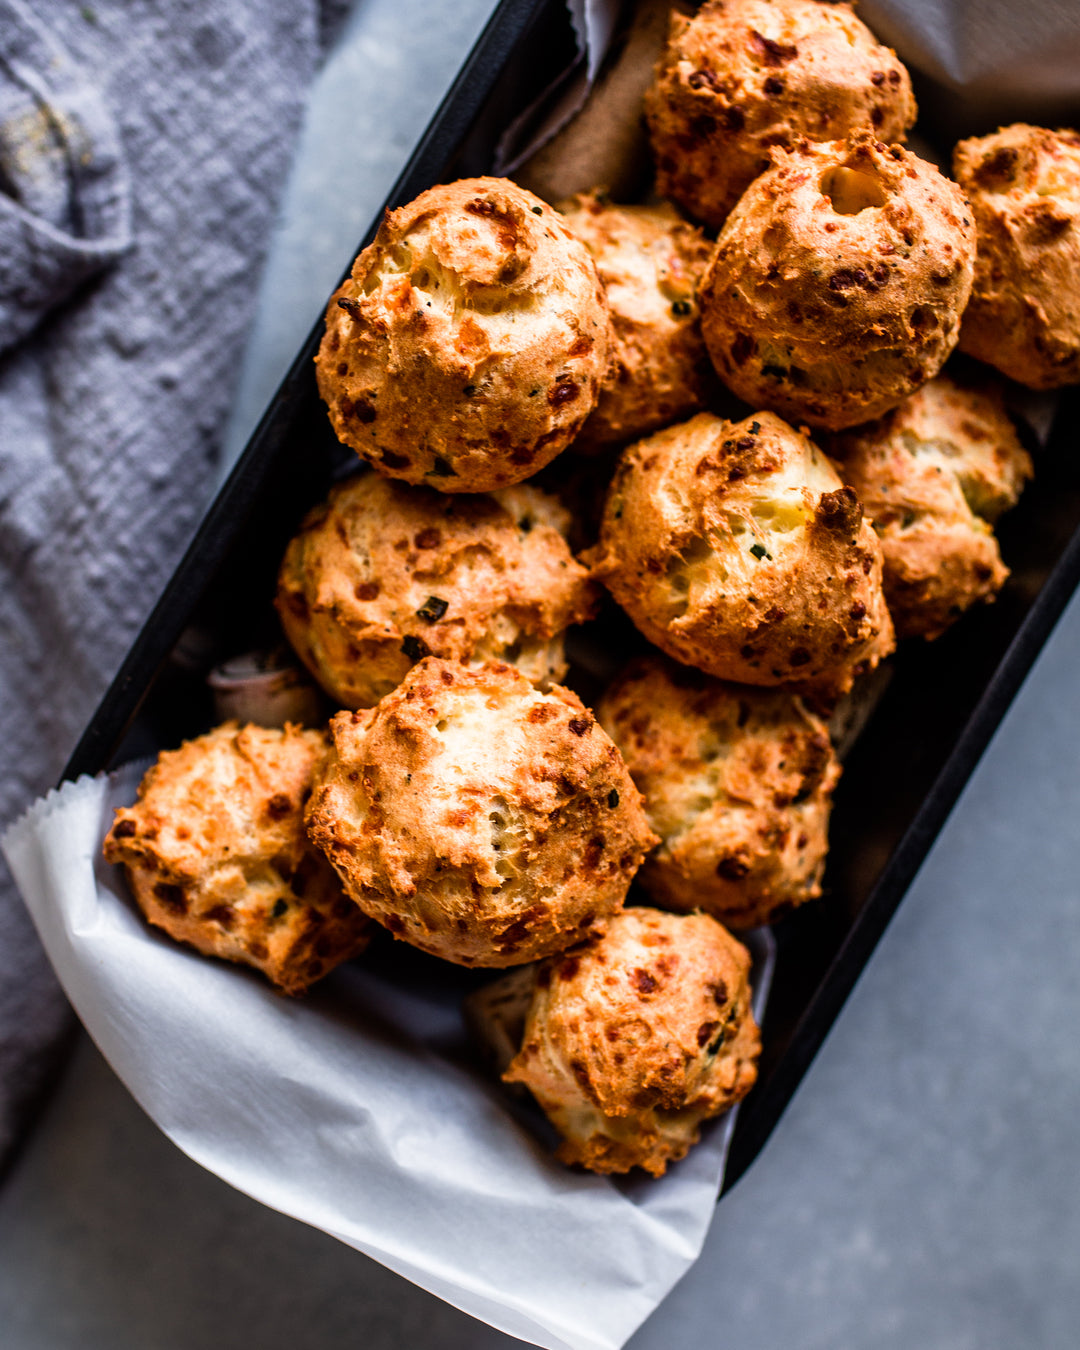 An elevated appetizer recipe for French-style asiago gougères that delivers light, airy cheese balls with a satisfying crunch. | peteandgerrys.com